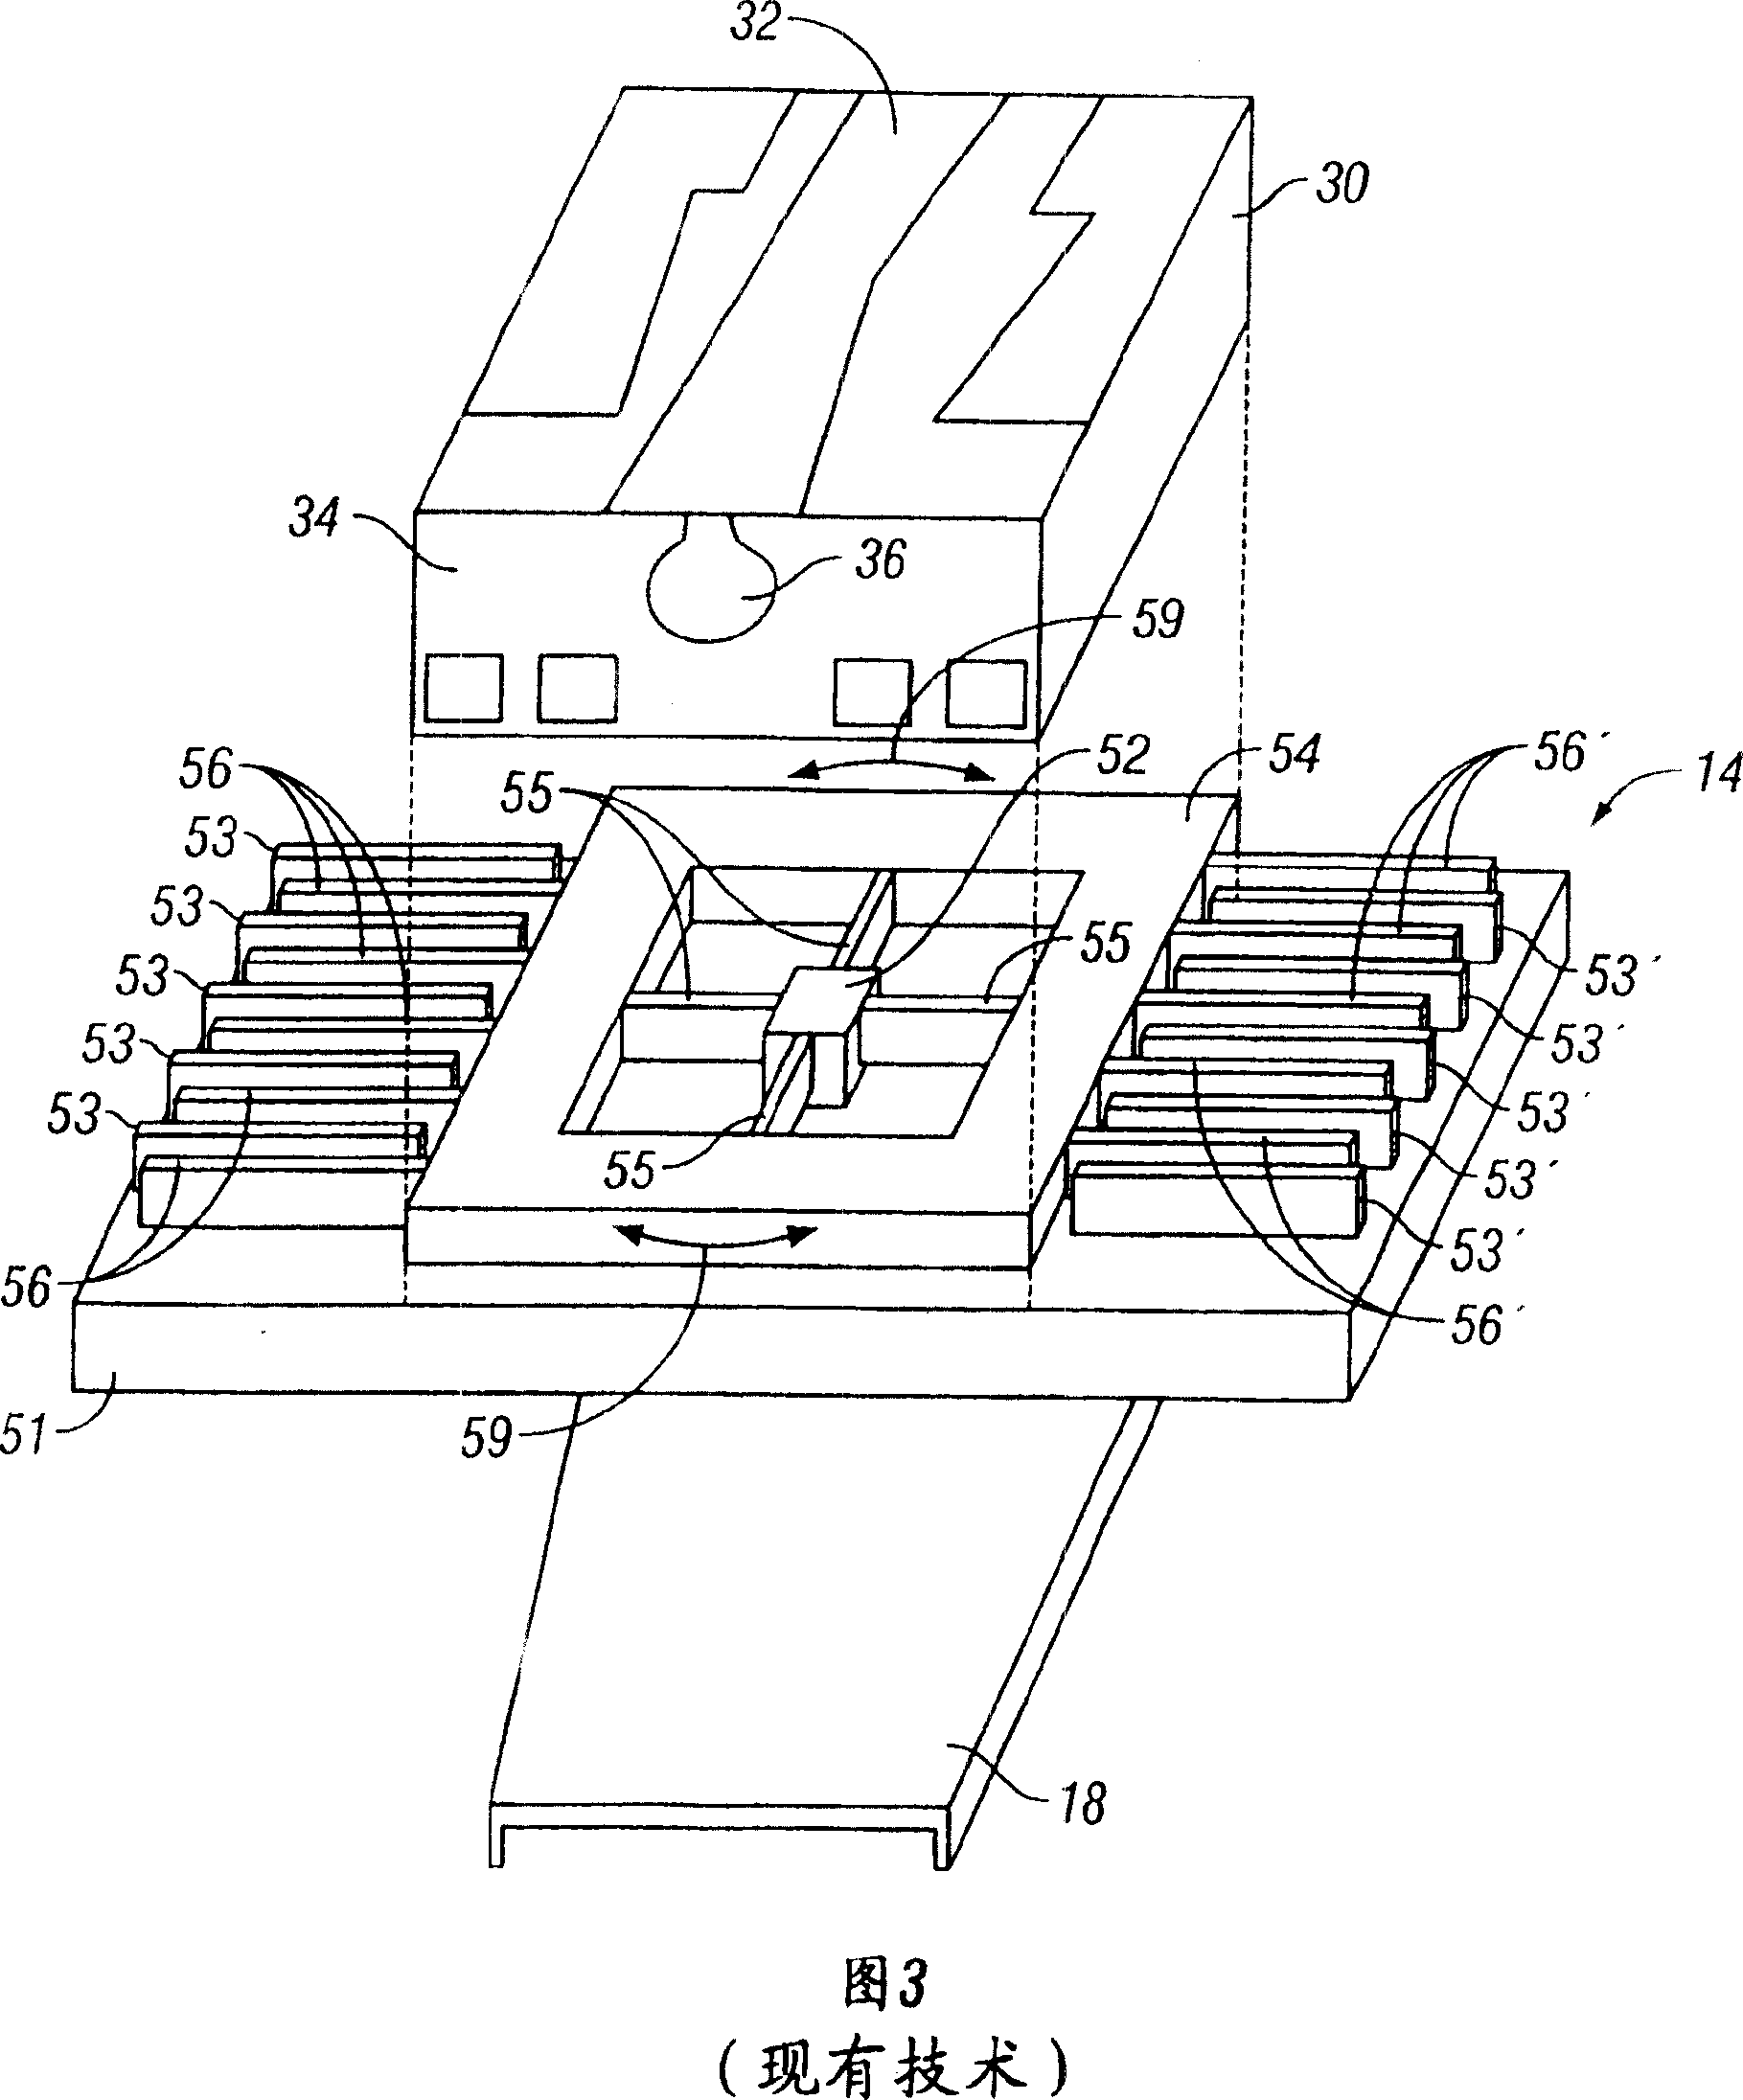 Static microactuator with electric insulative movable portion and related driving circuit